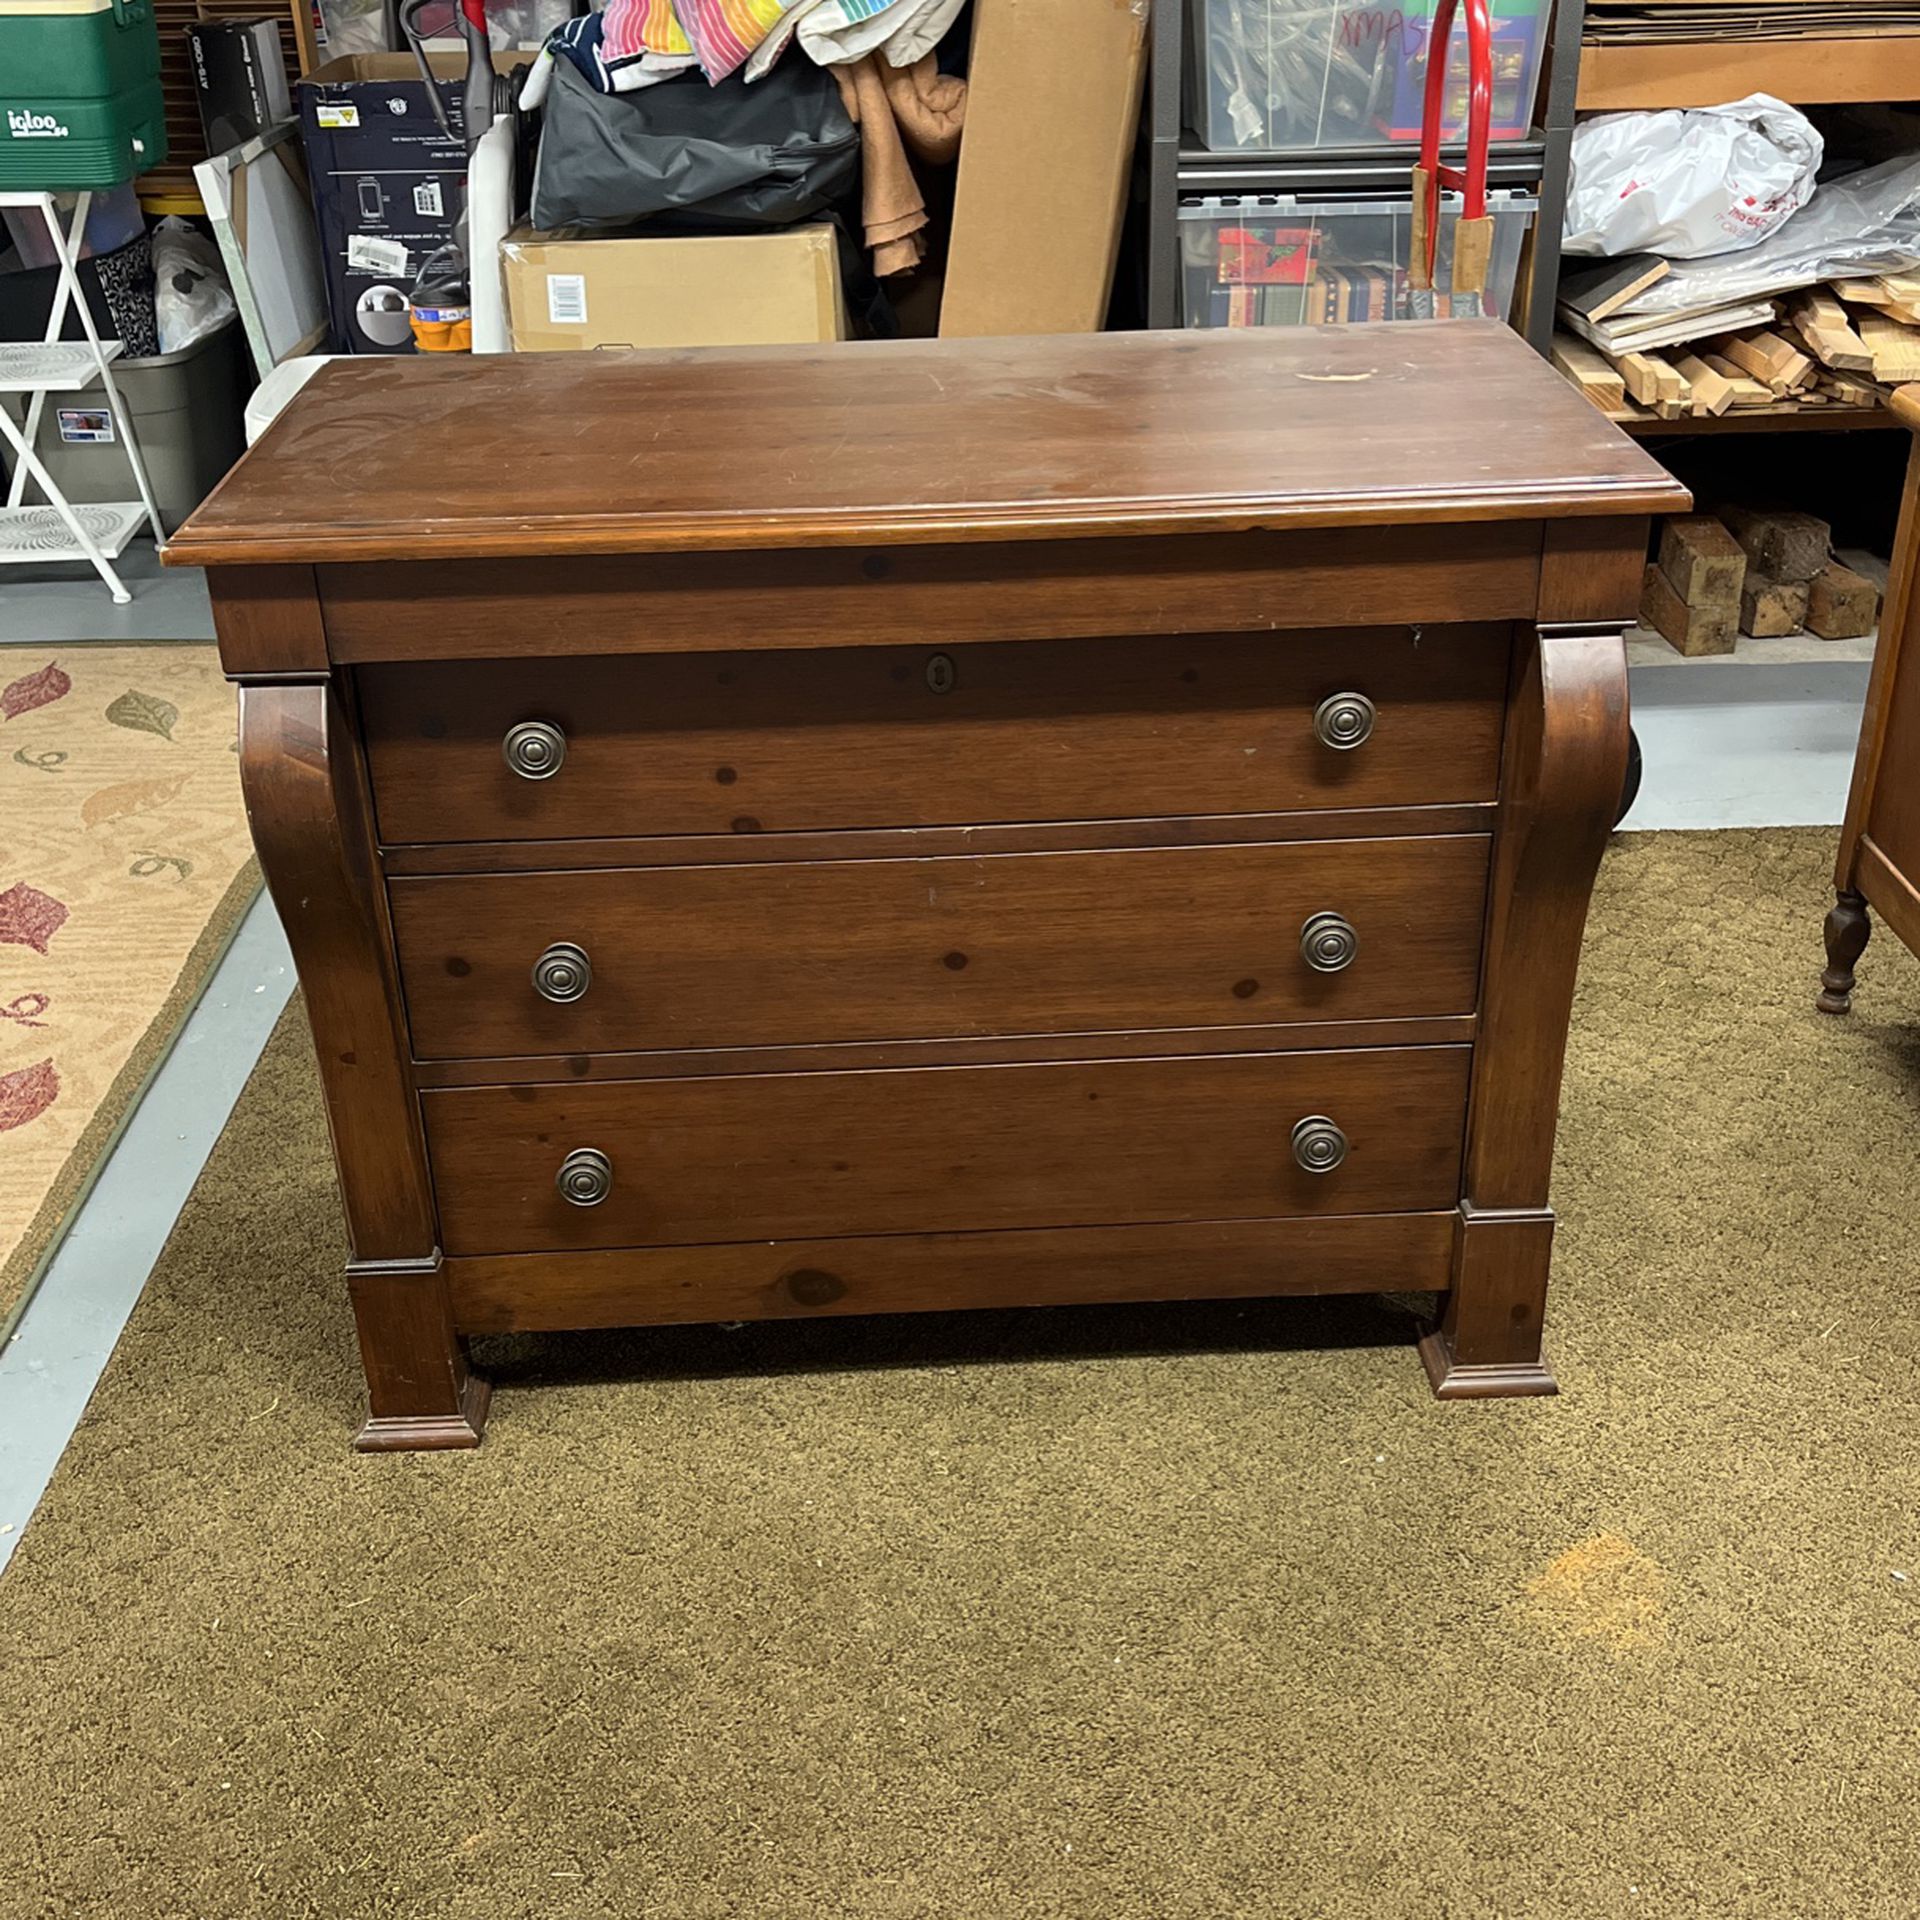 Edgewood Chest (Brown Oak), Size: Small, Other